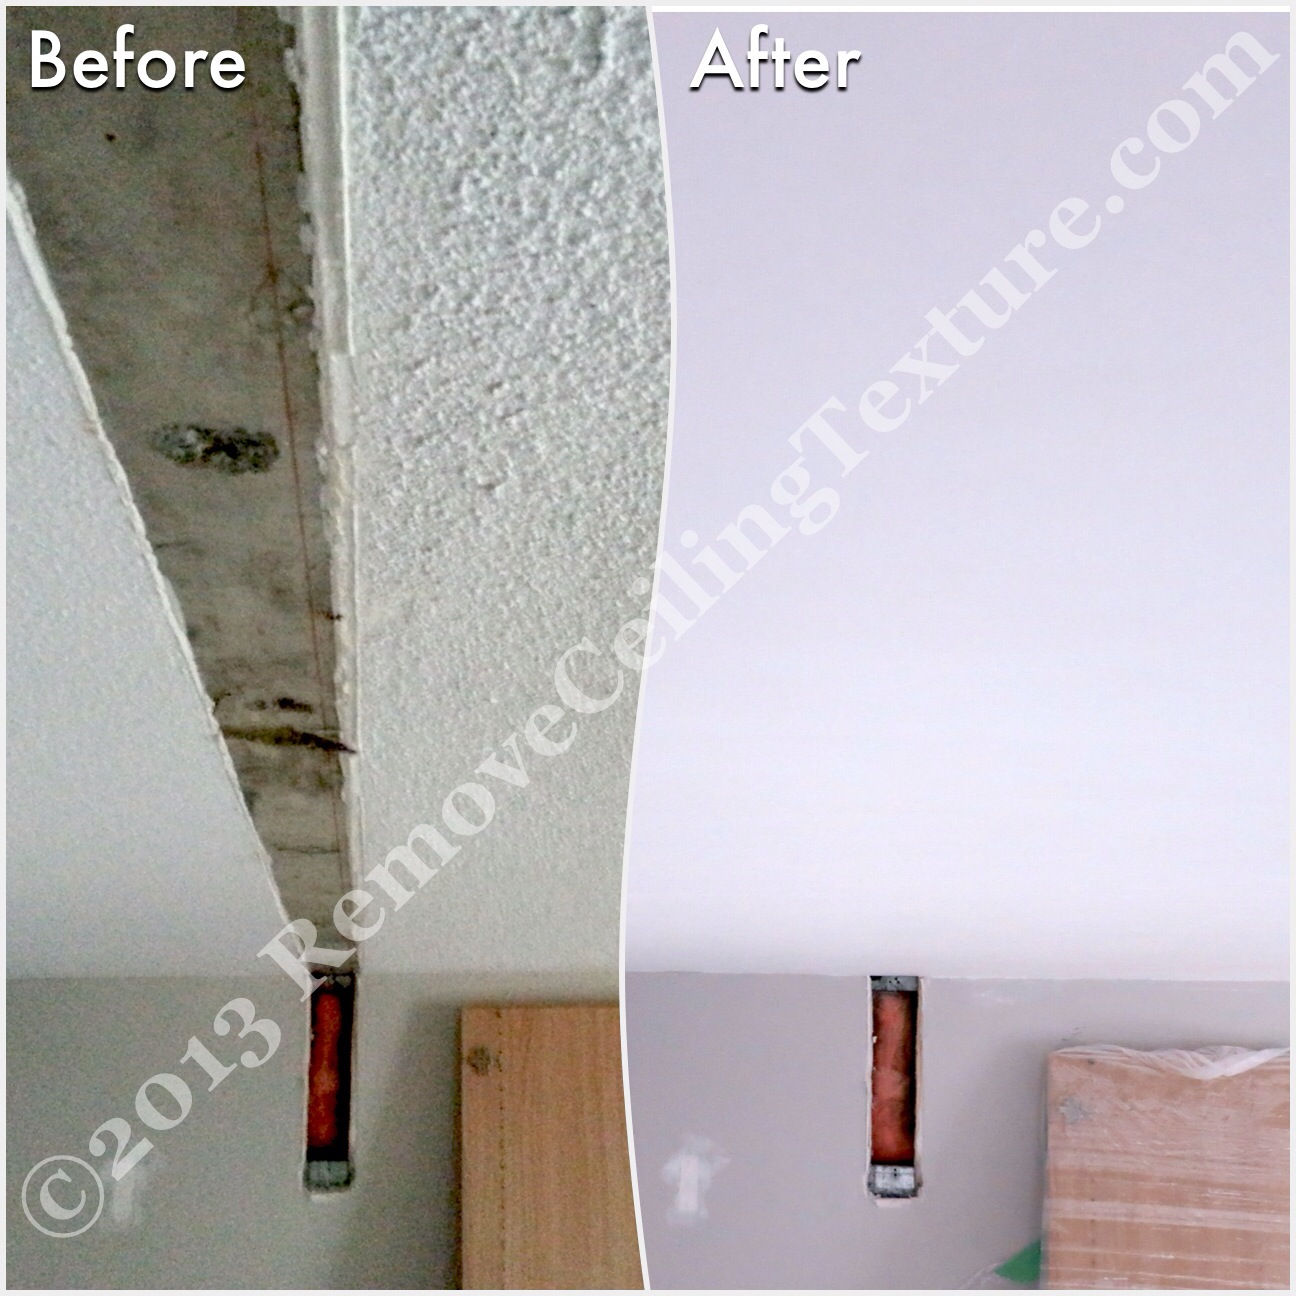 After removing walls, ceiling repairs will need to be done, as you can see at this condo at 1331 Homer Street